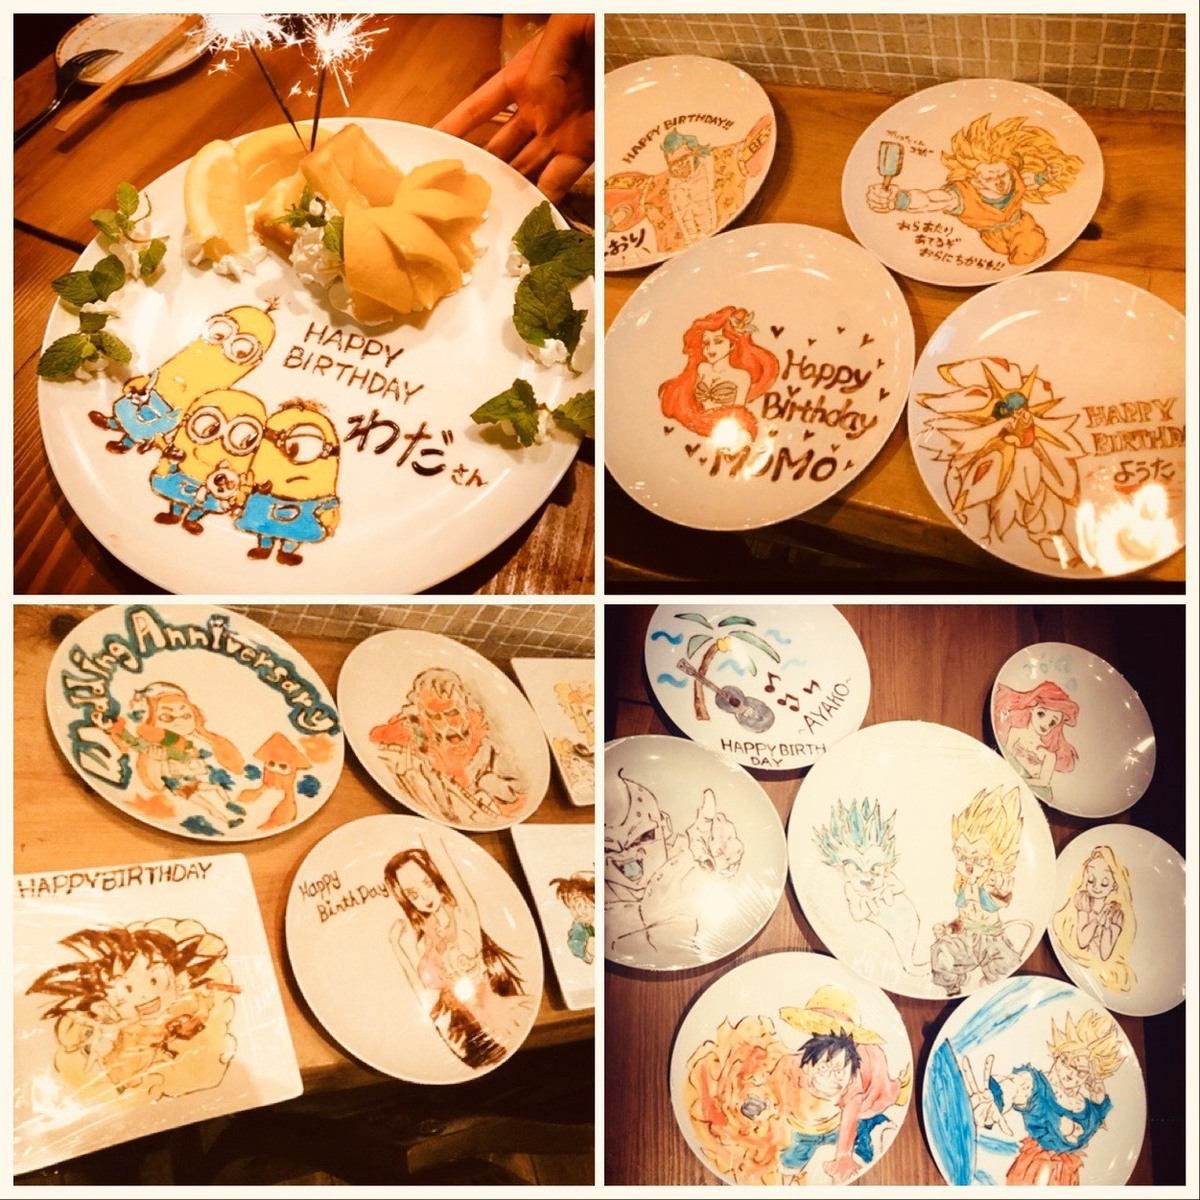 Free plate with decoration of your favorite picture [1000 yen]!